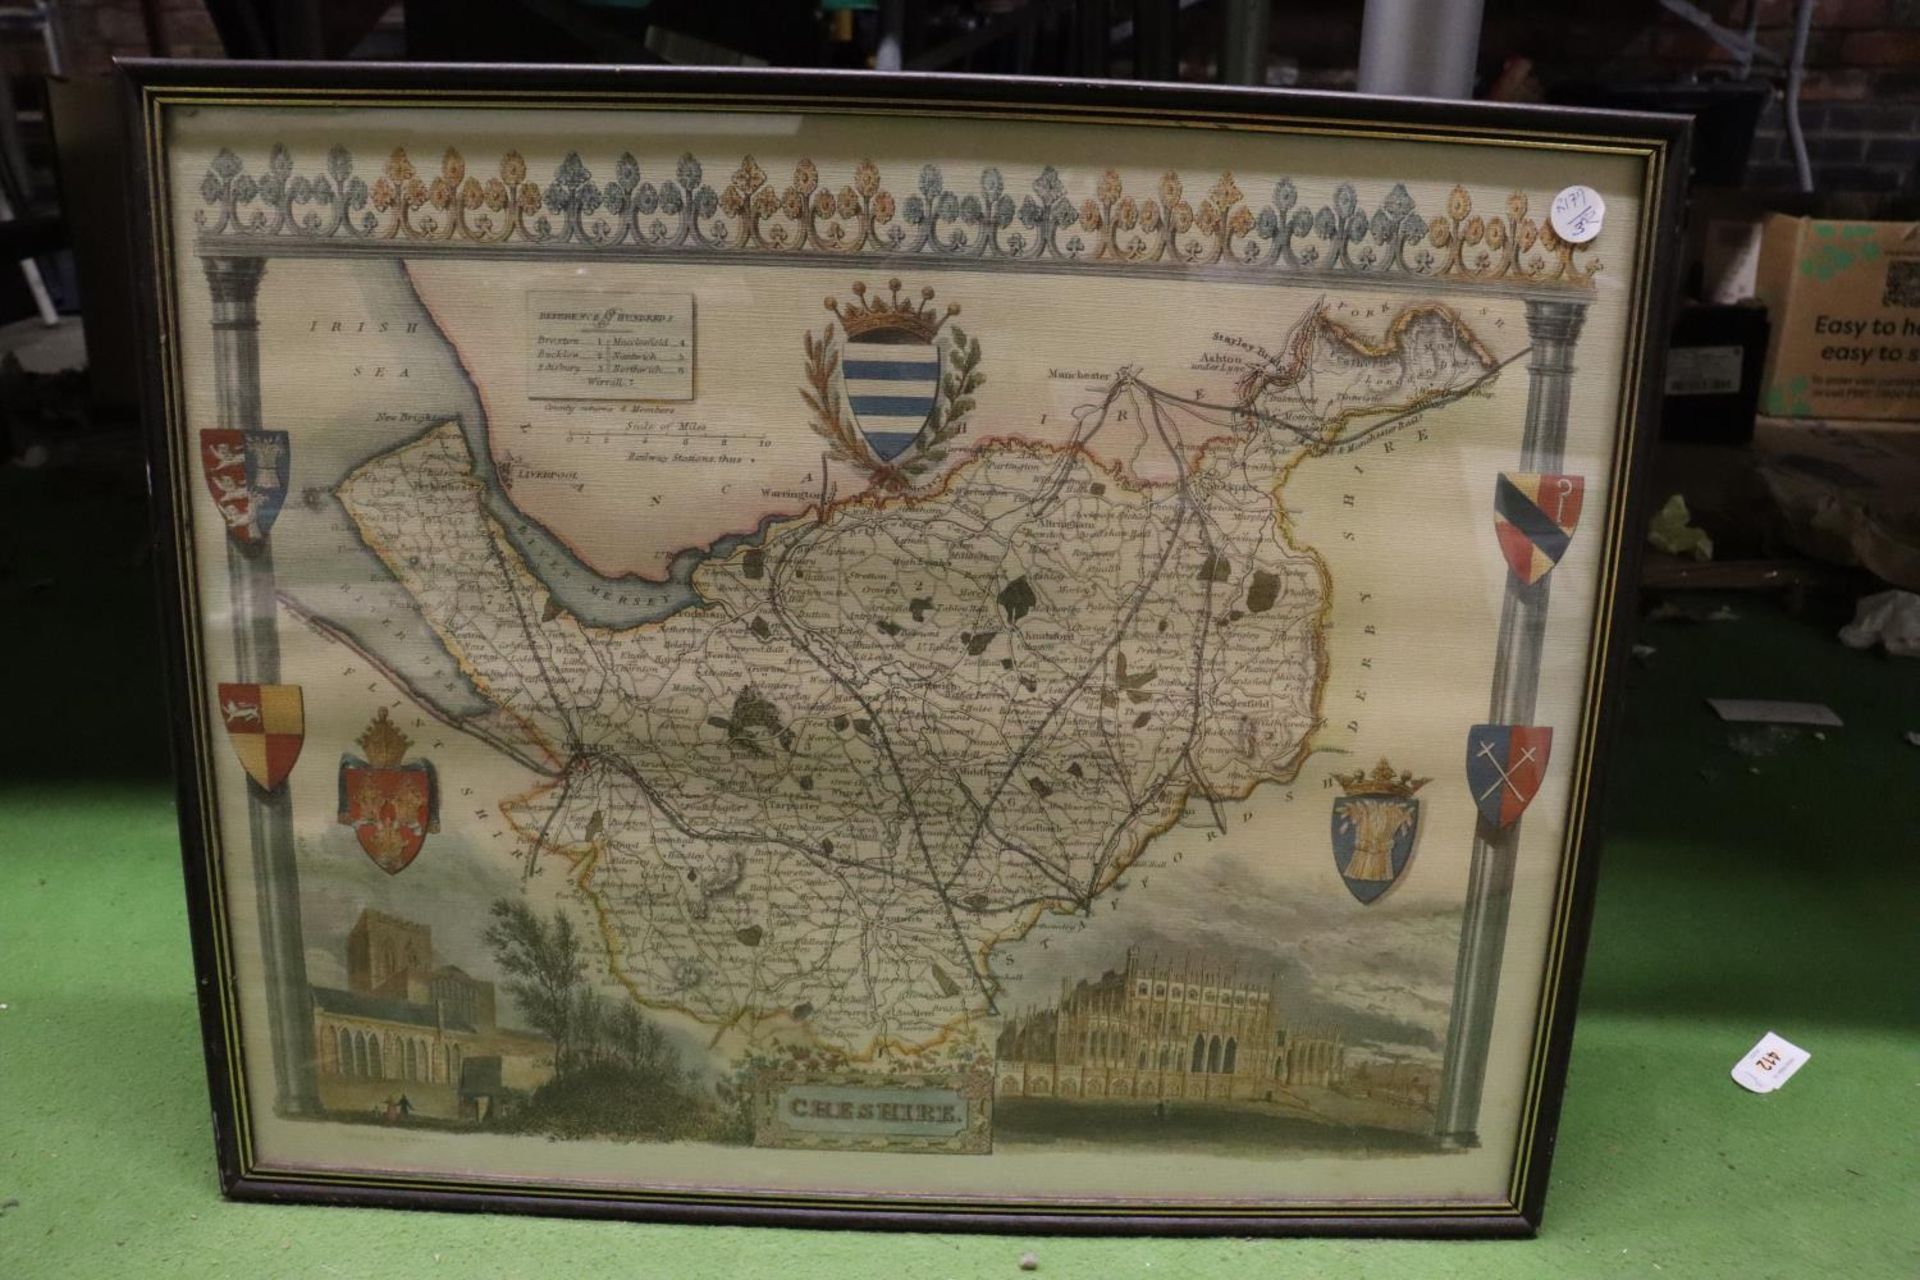 TWO FRAMED VINTAGE MAPS OF CHESHIRE AND THE ORIENT - Image 3 of 5